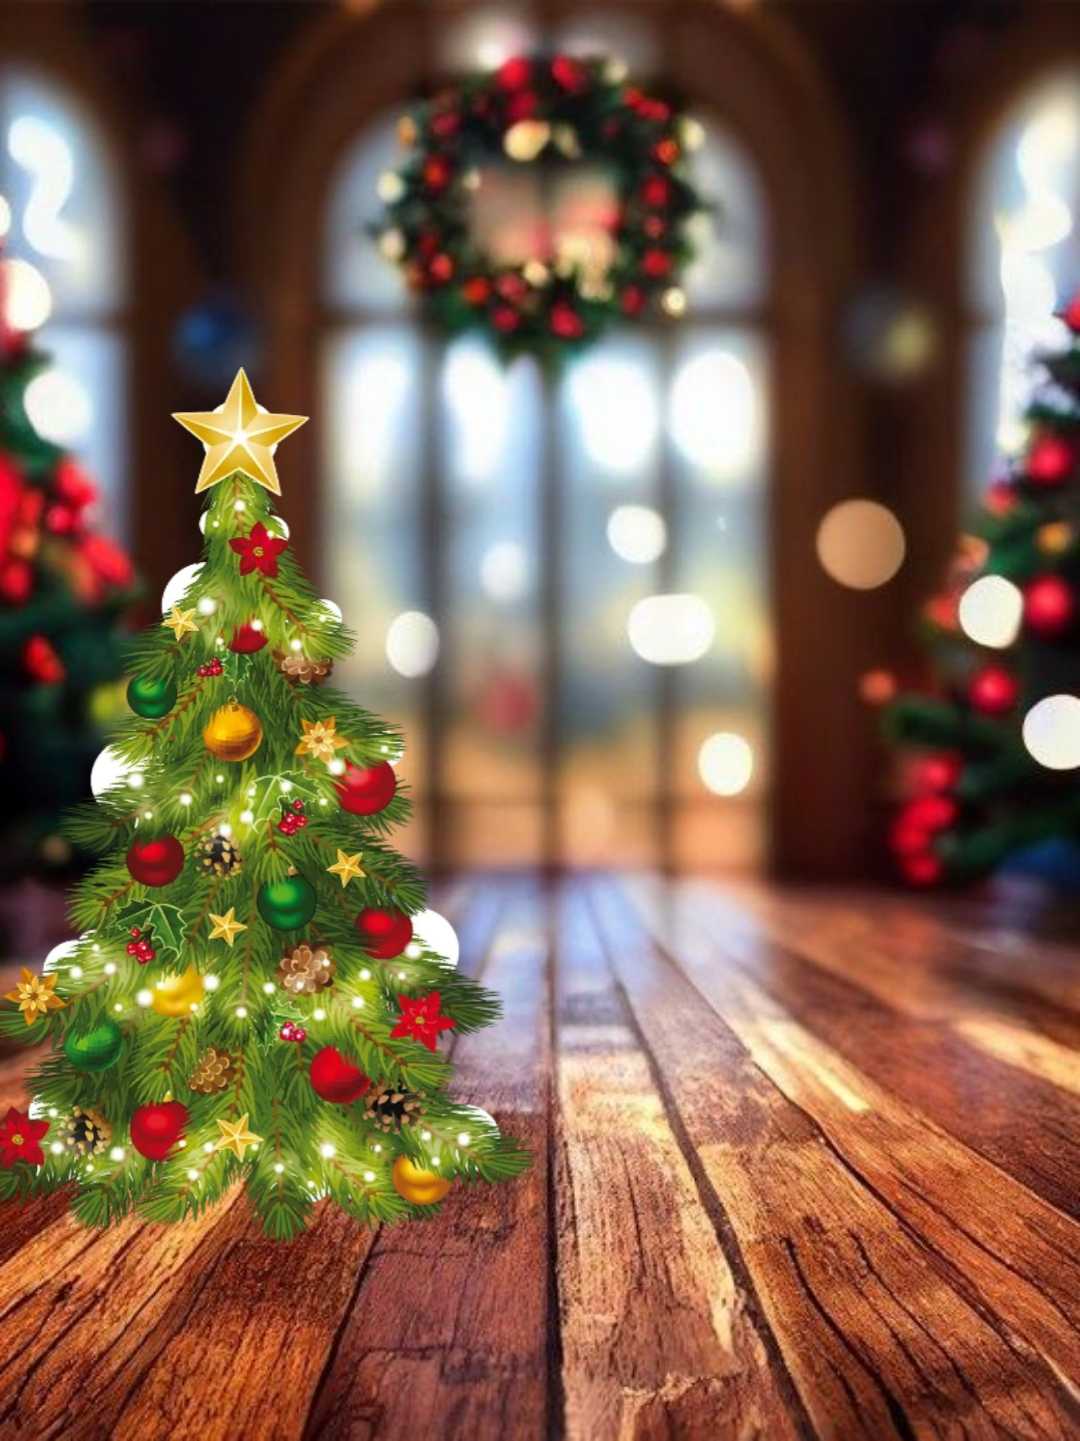 Full hd christmas editing backgrounds